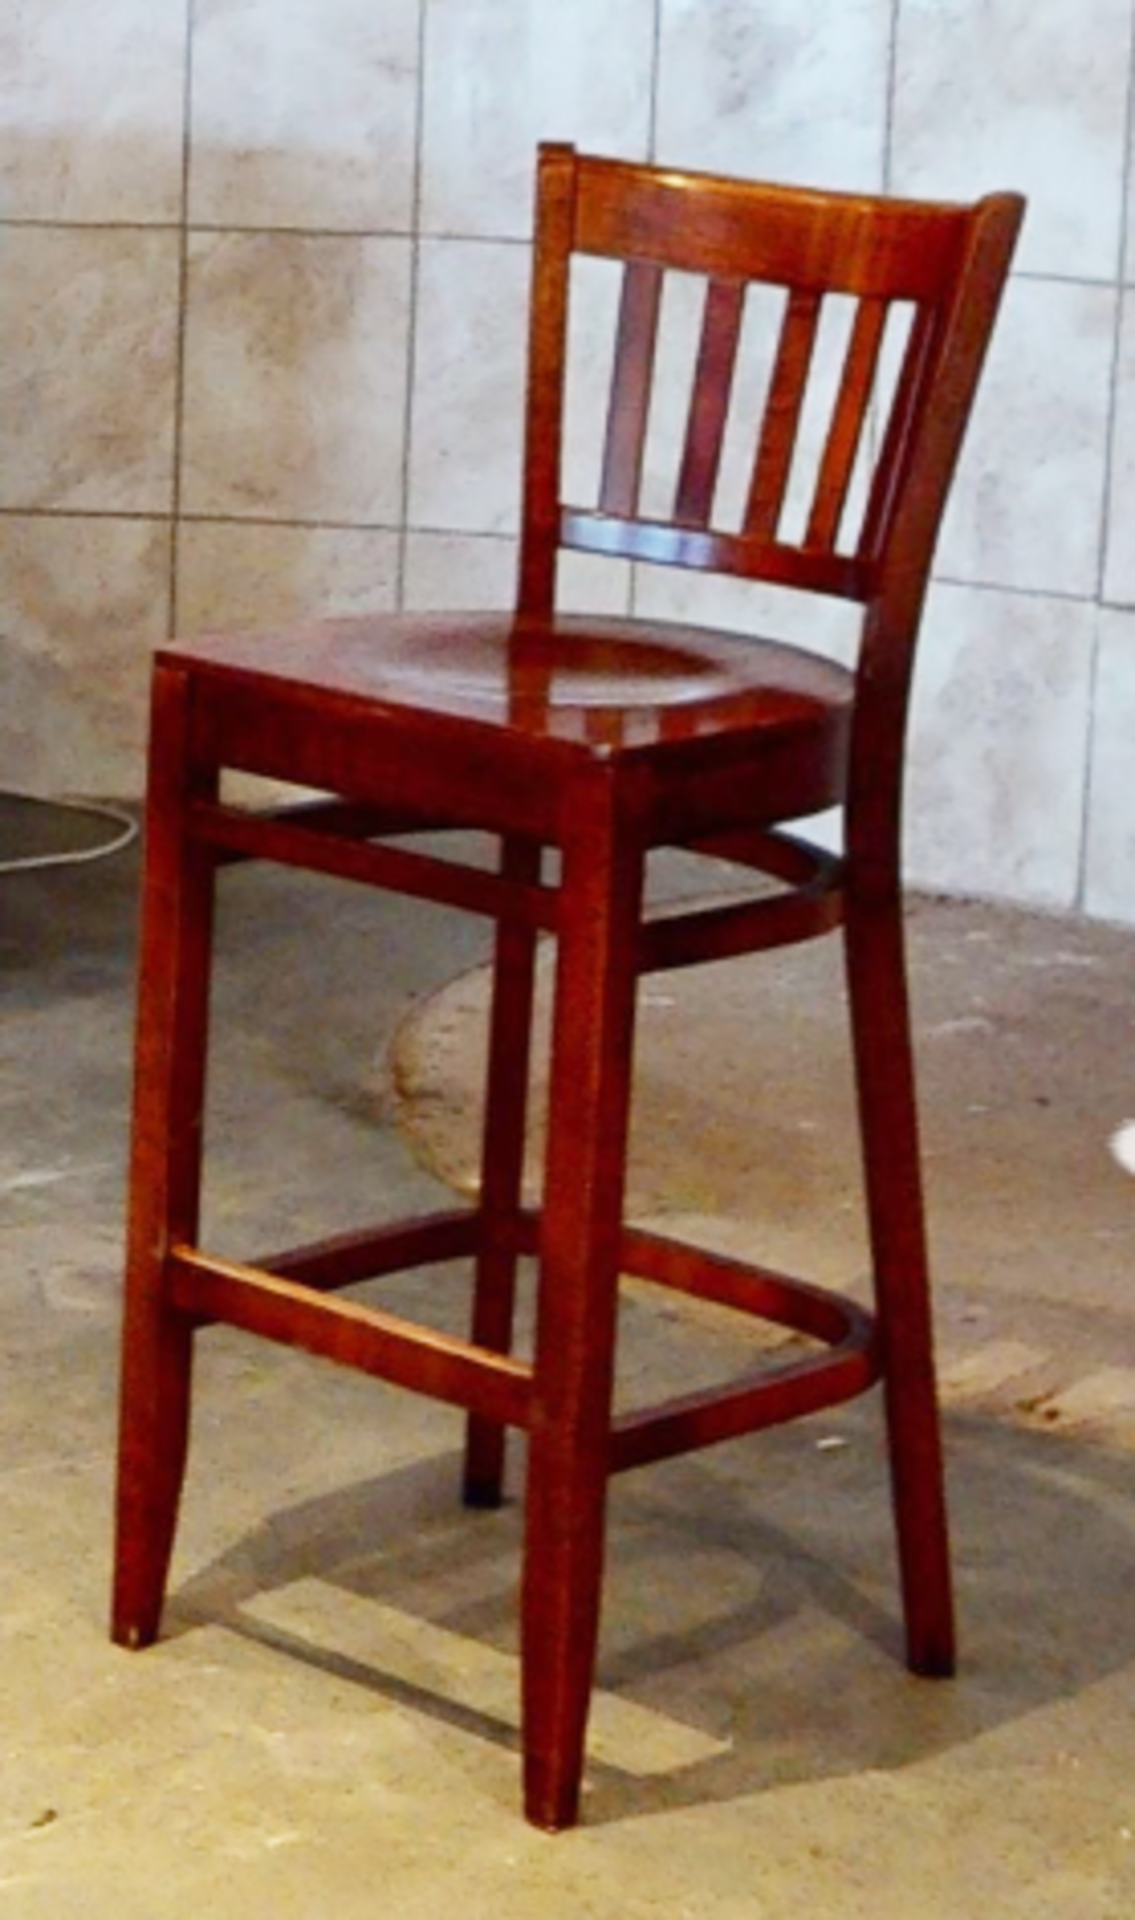 6 x Wooden Restaurant Barstools - CL701 - Location: Ashton Moss, Manchester, OL7Collections:This